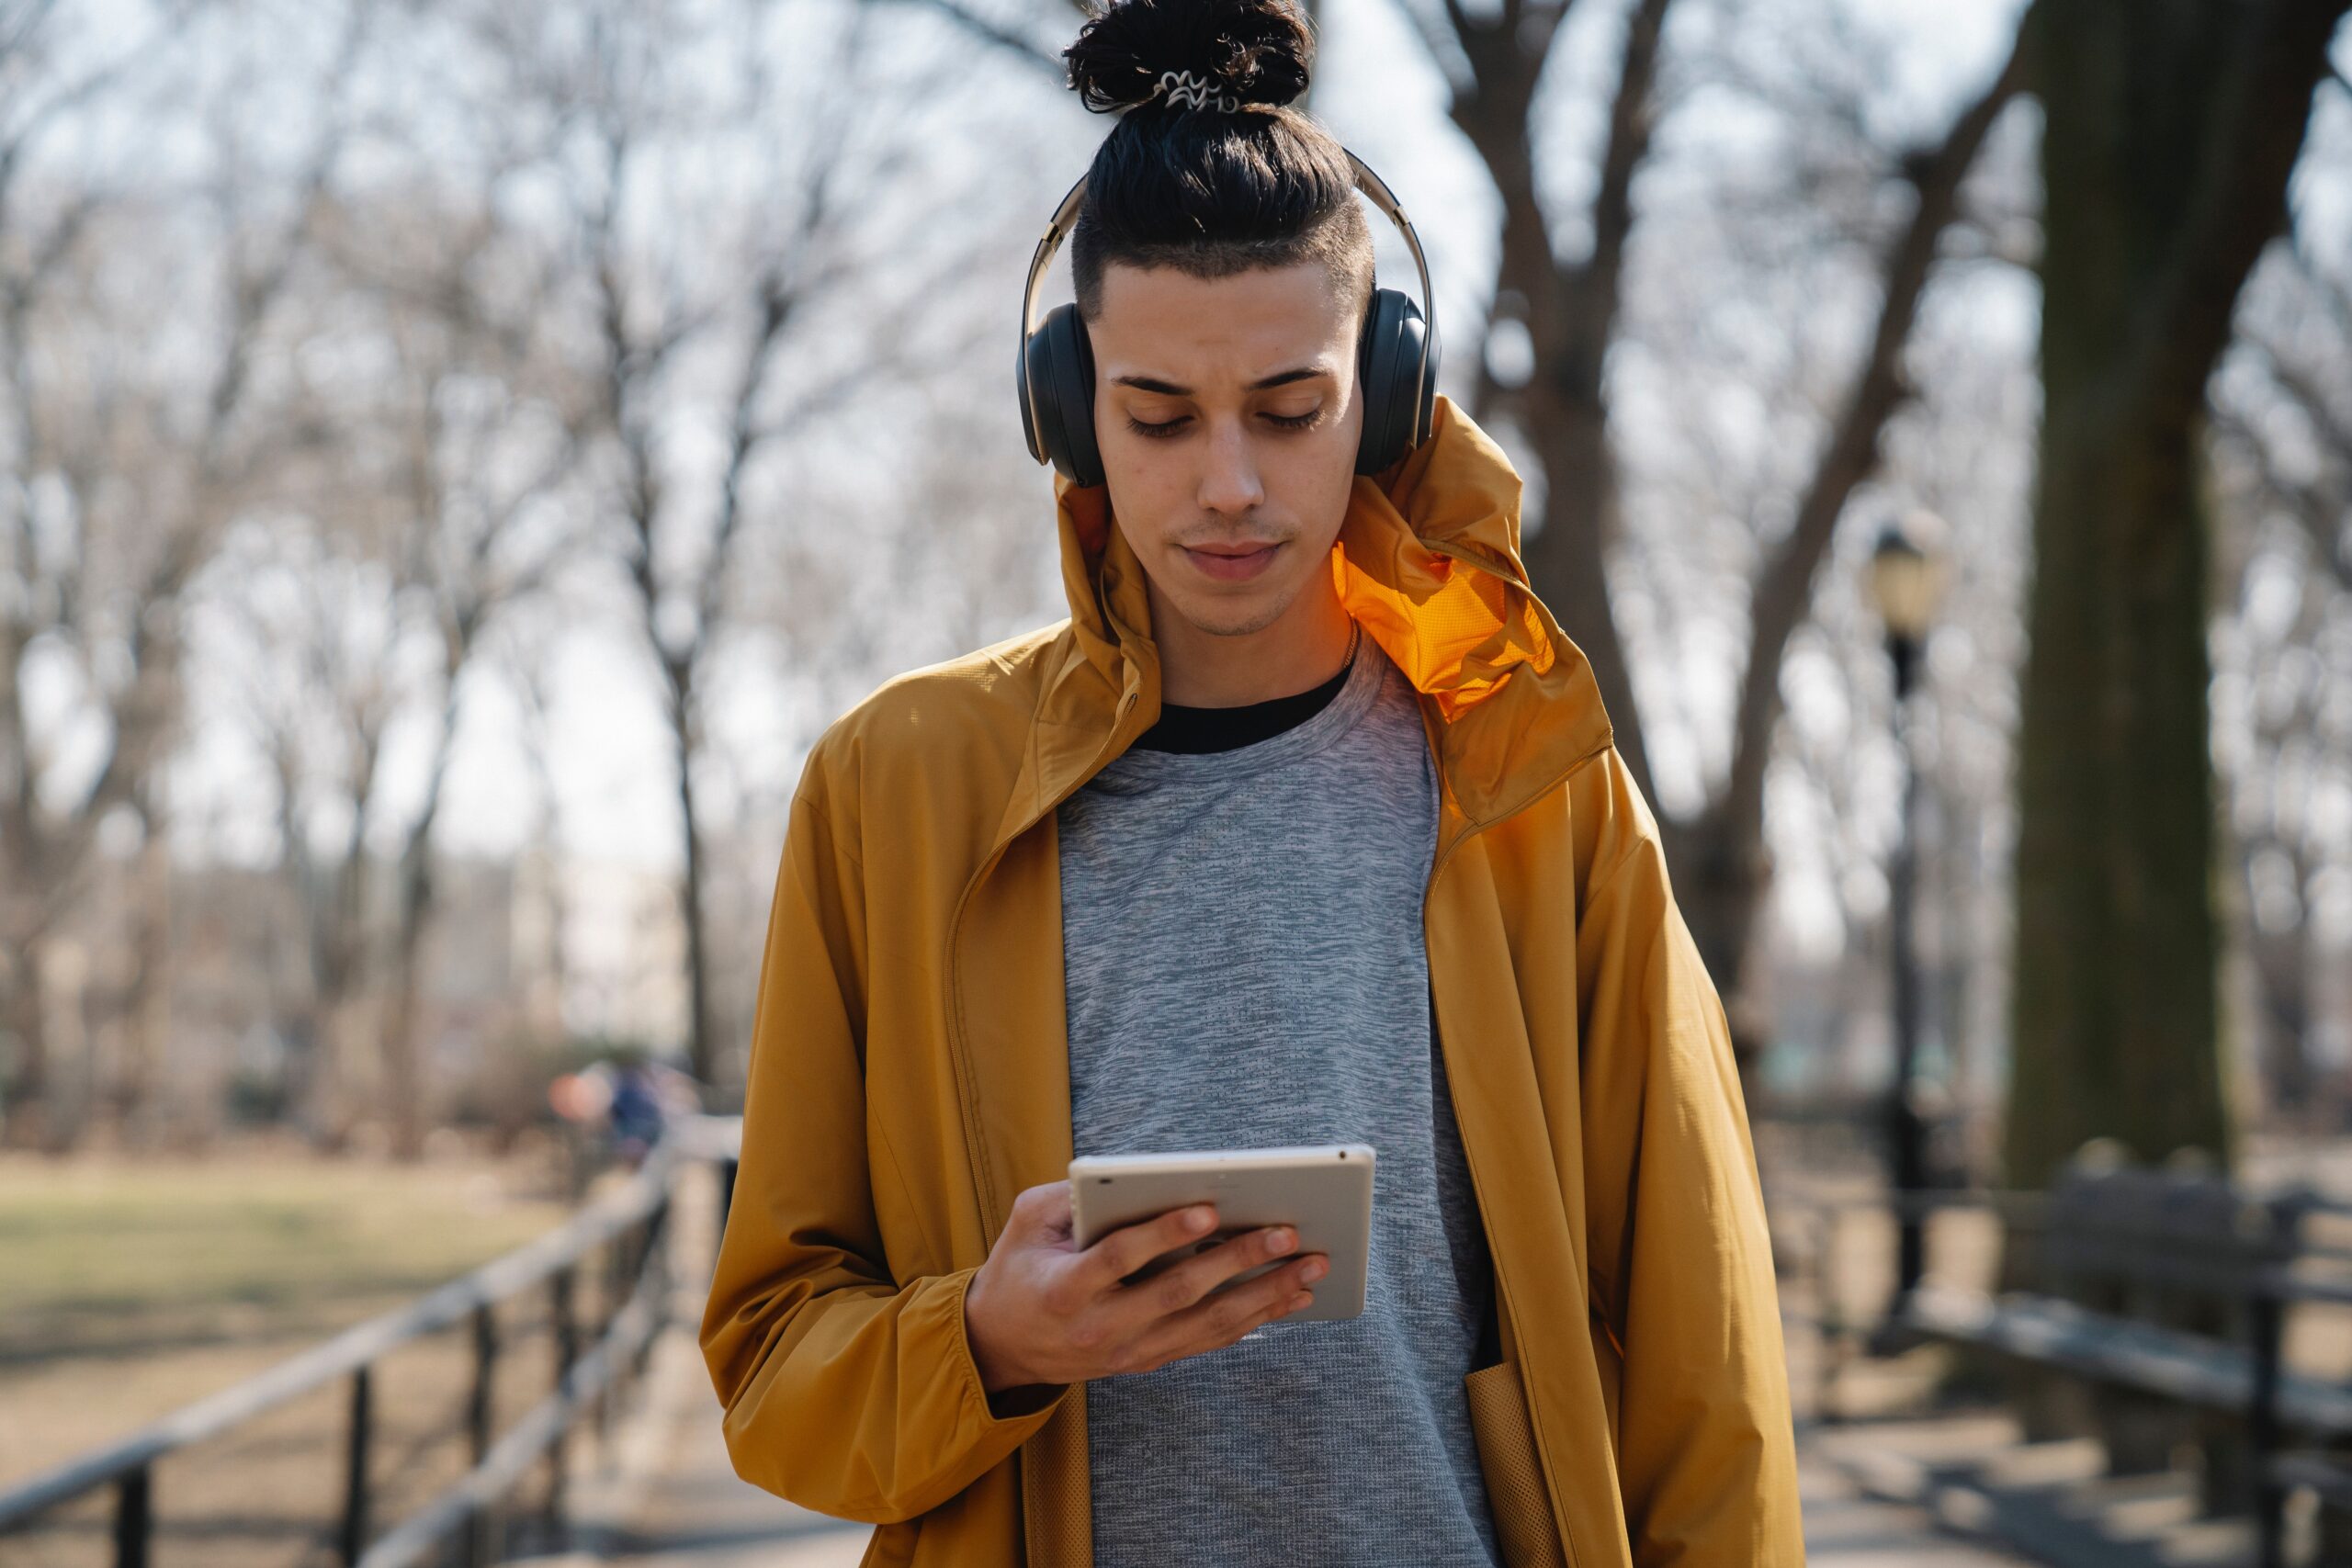 A guy with headphones listening to music on a tablet